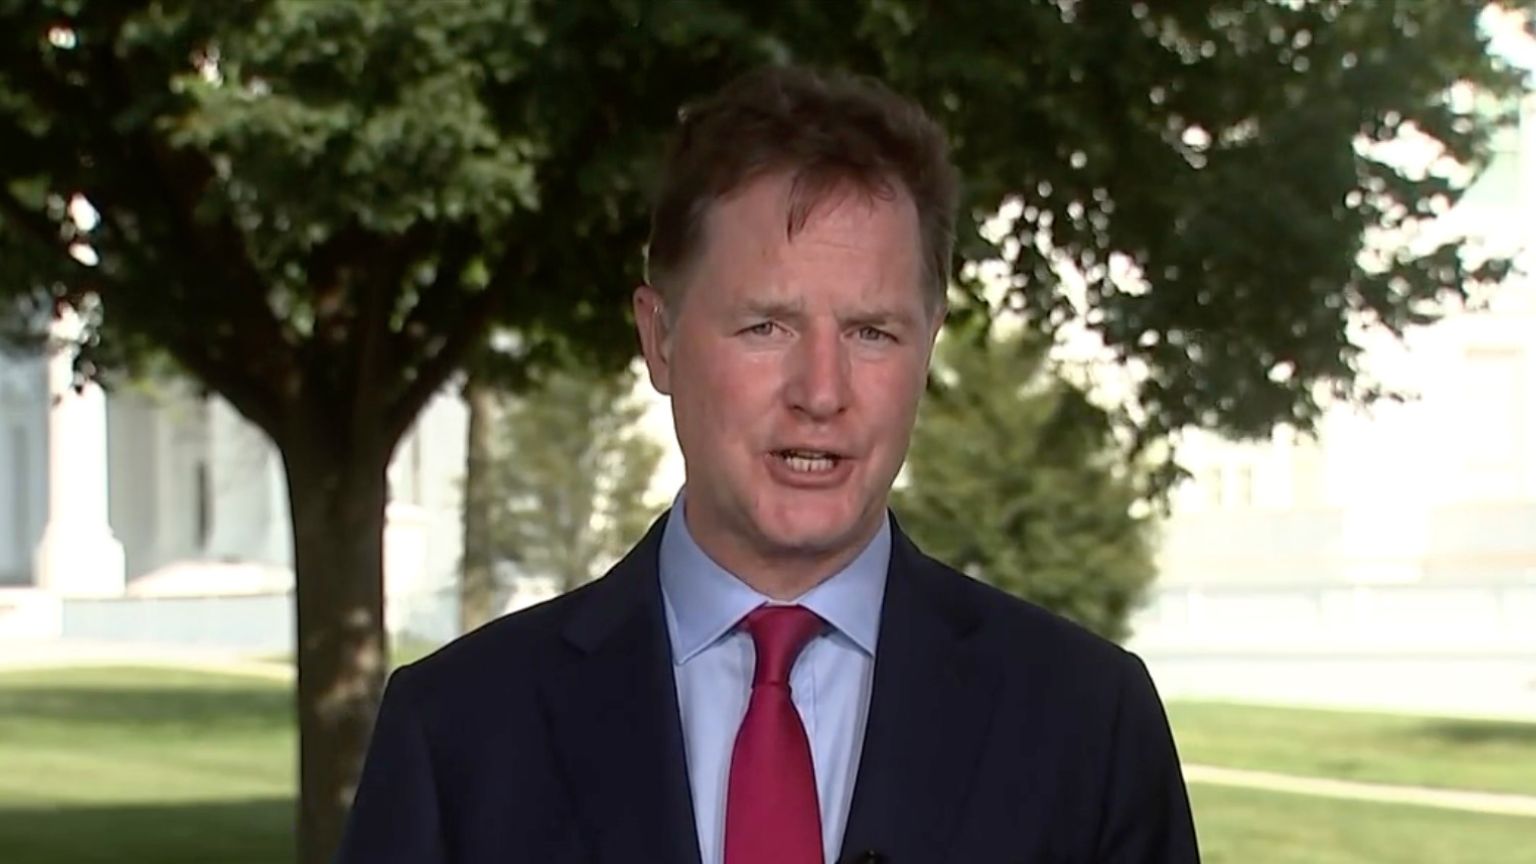 Meta’s Nick Clegg Brags About Censoring “Election Misinformation”